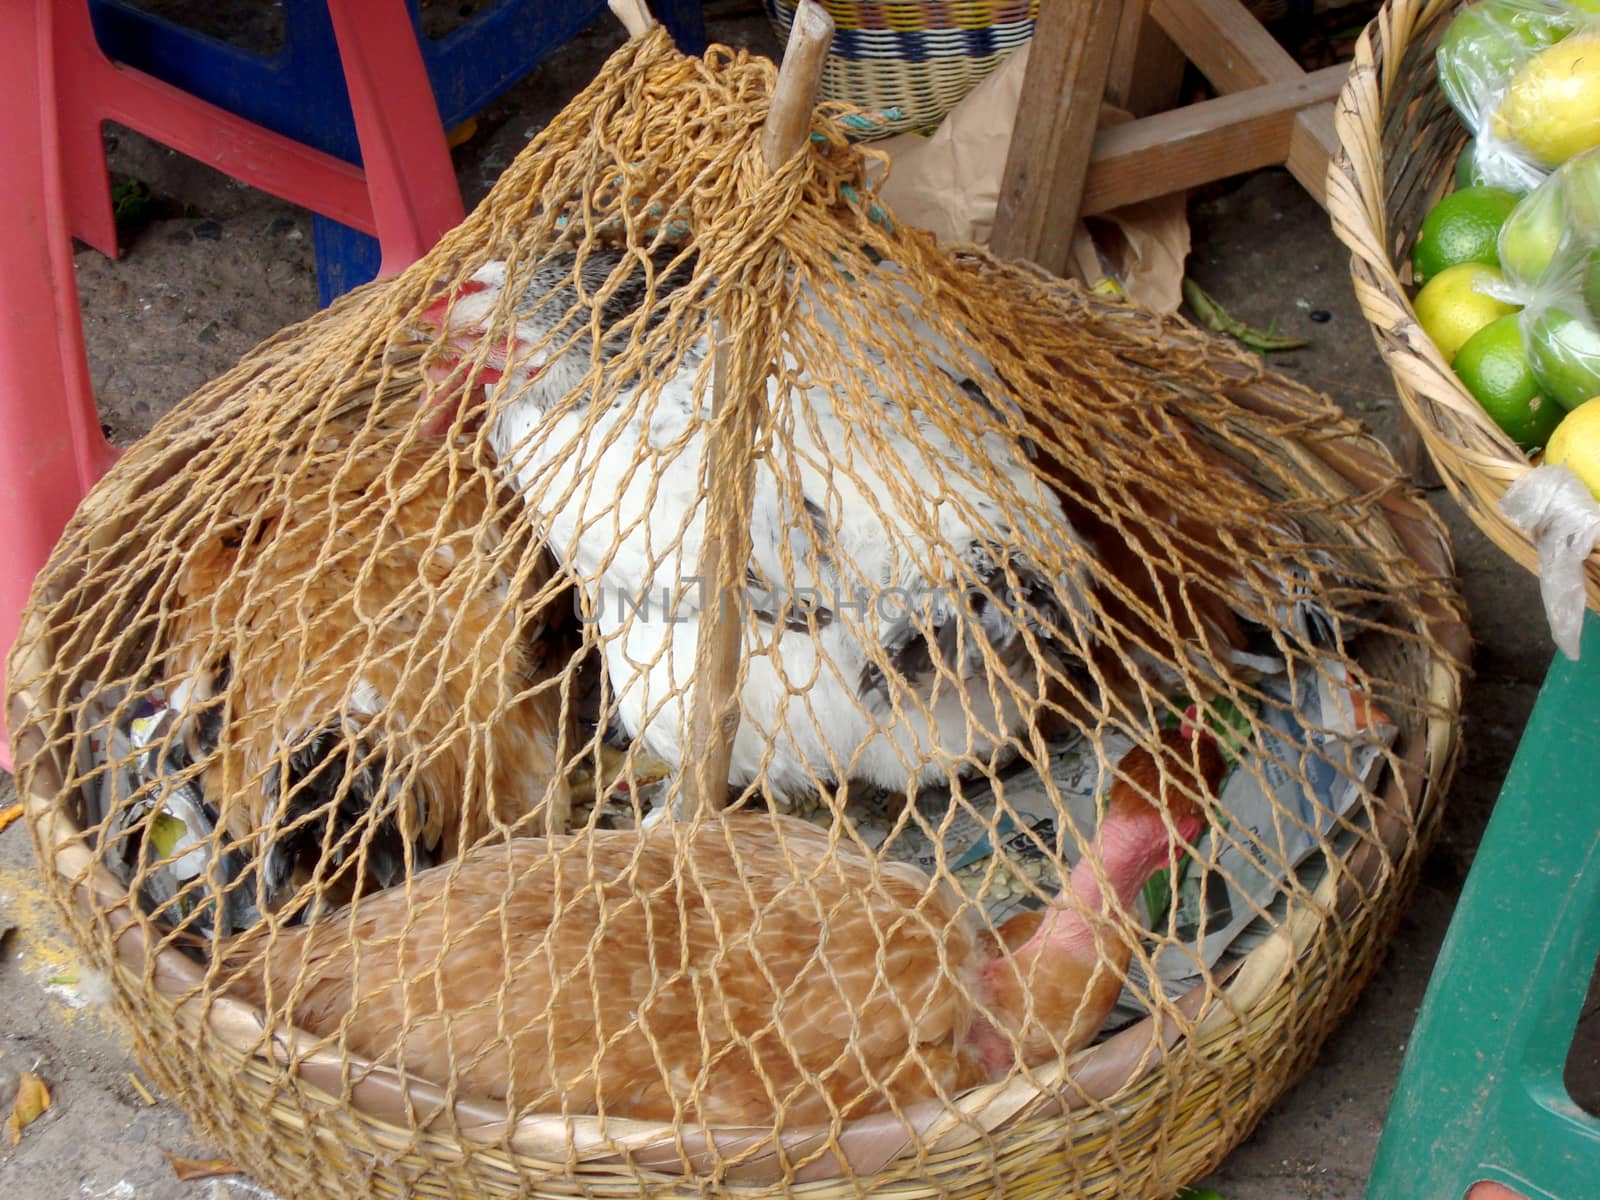 chickens for sale in street market by ftlaudgirl